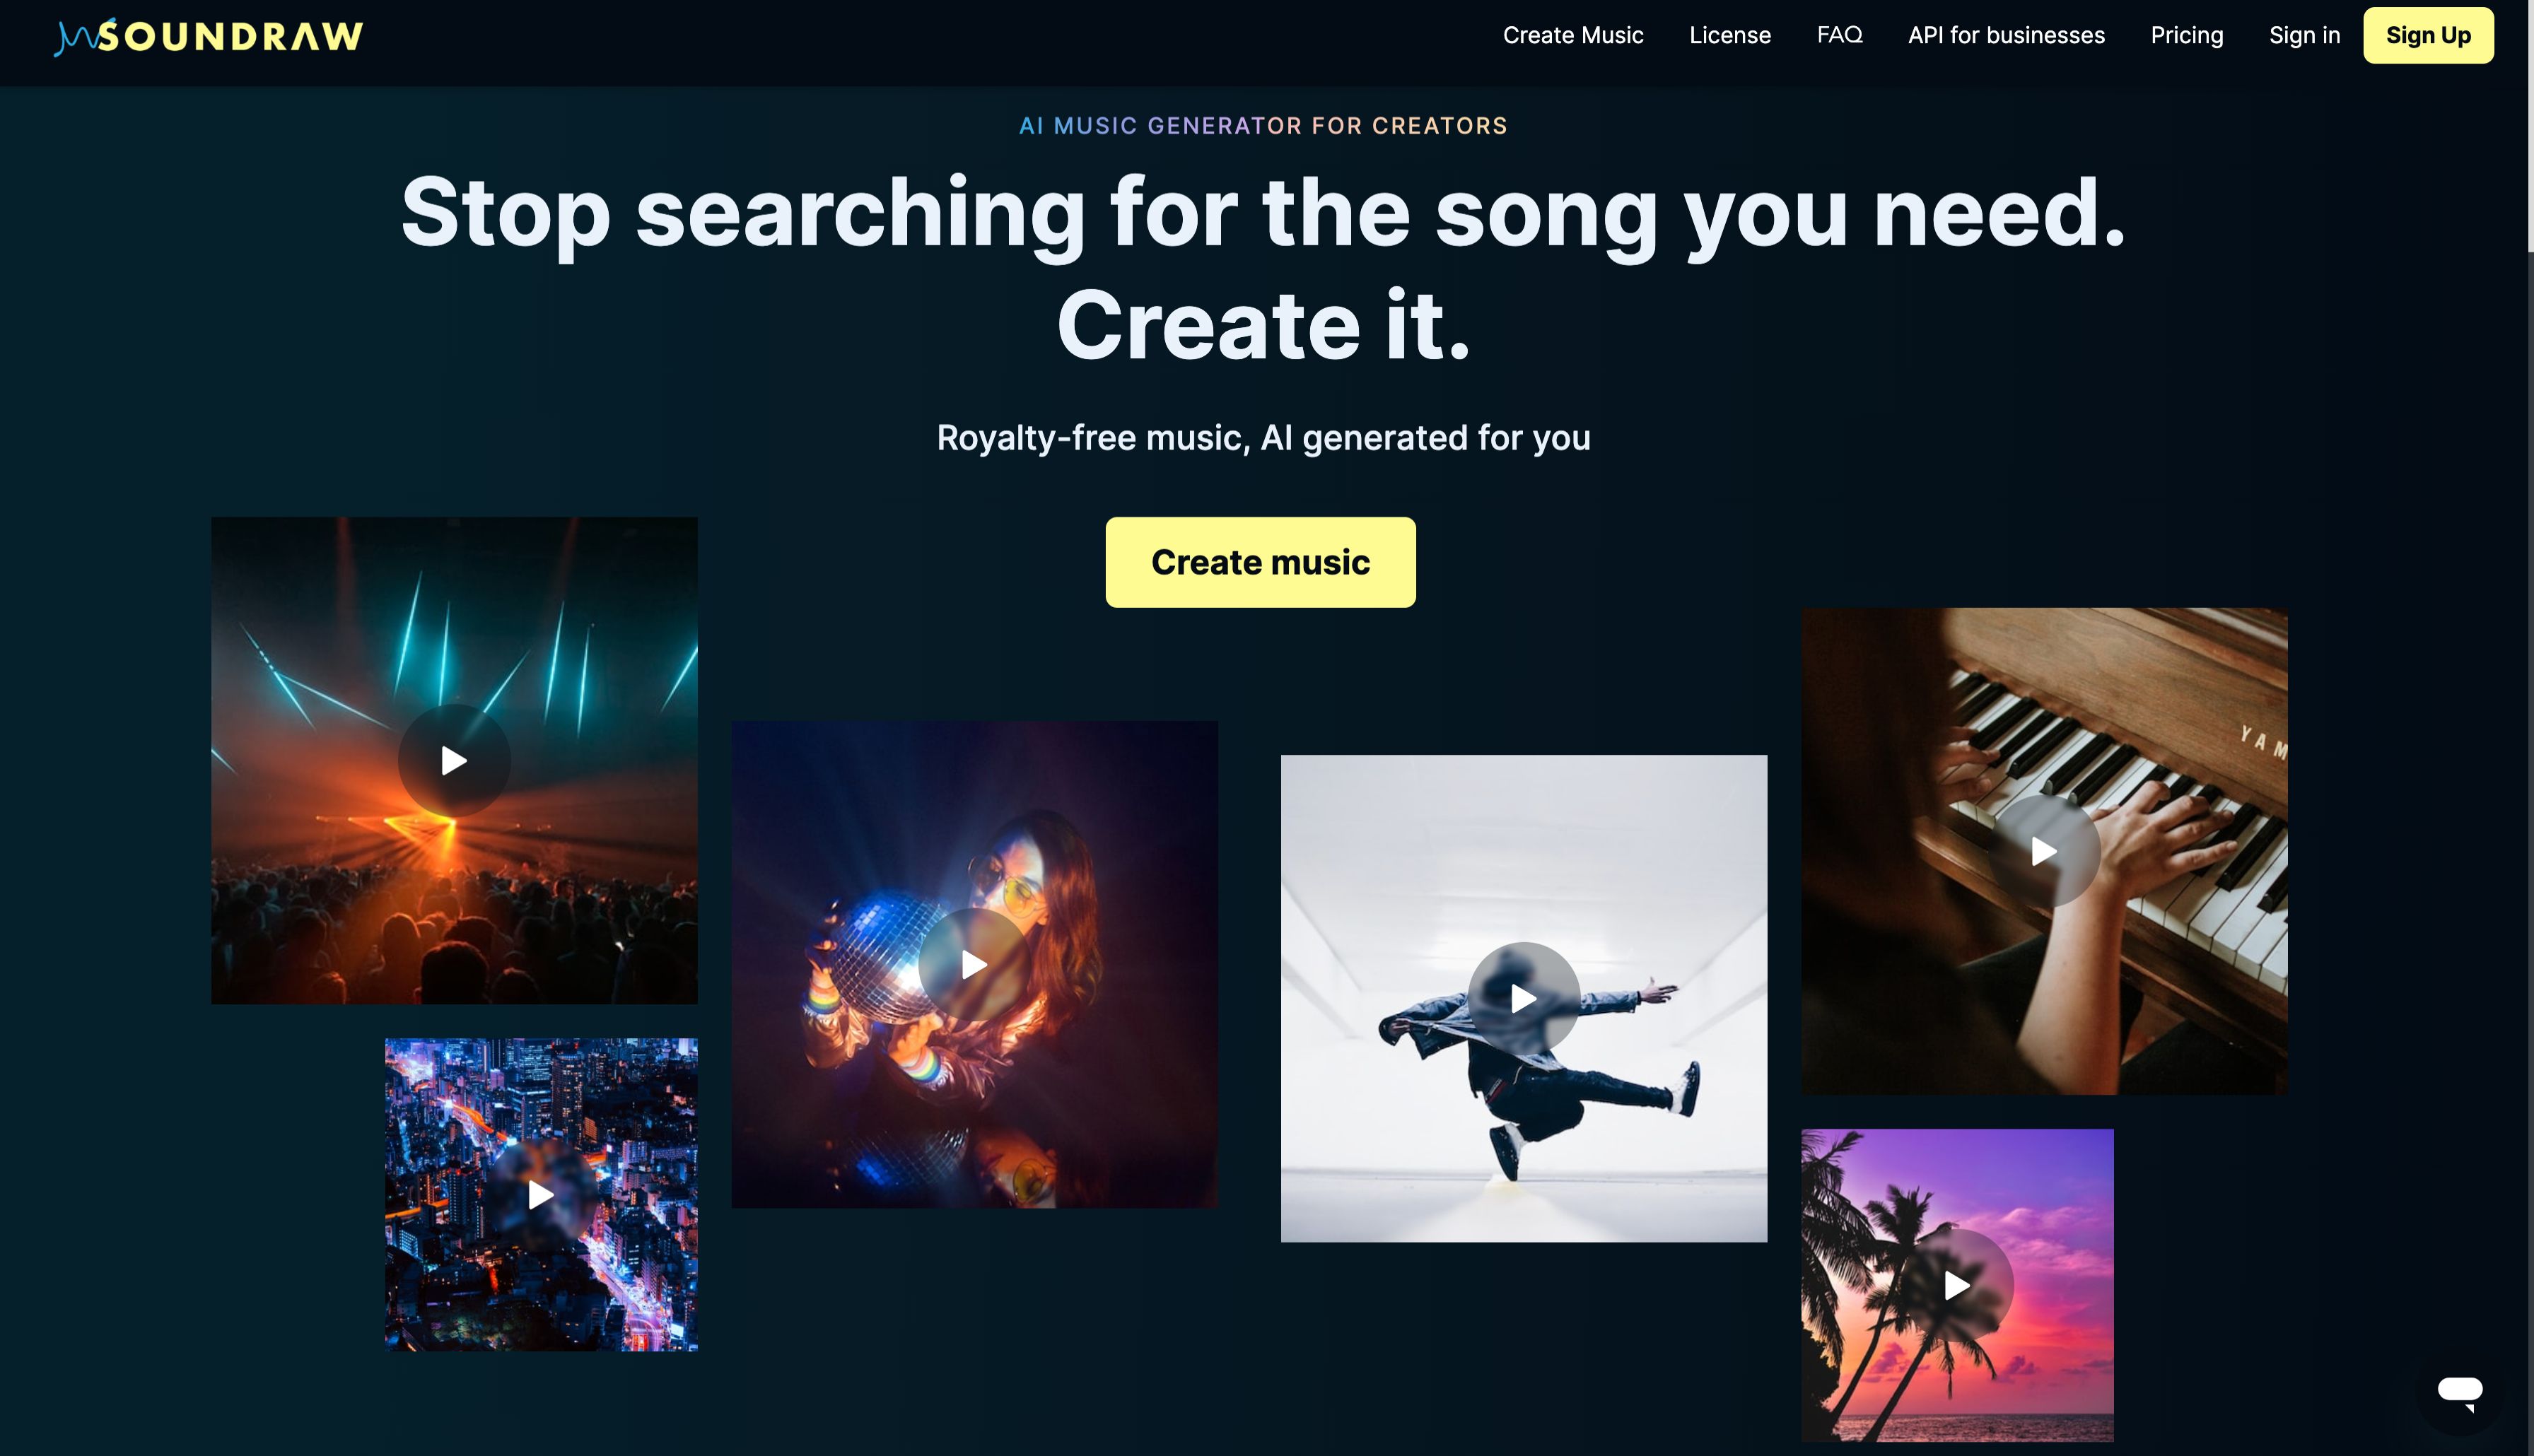 Various music images cluttered on the homepage of Soundraw